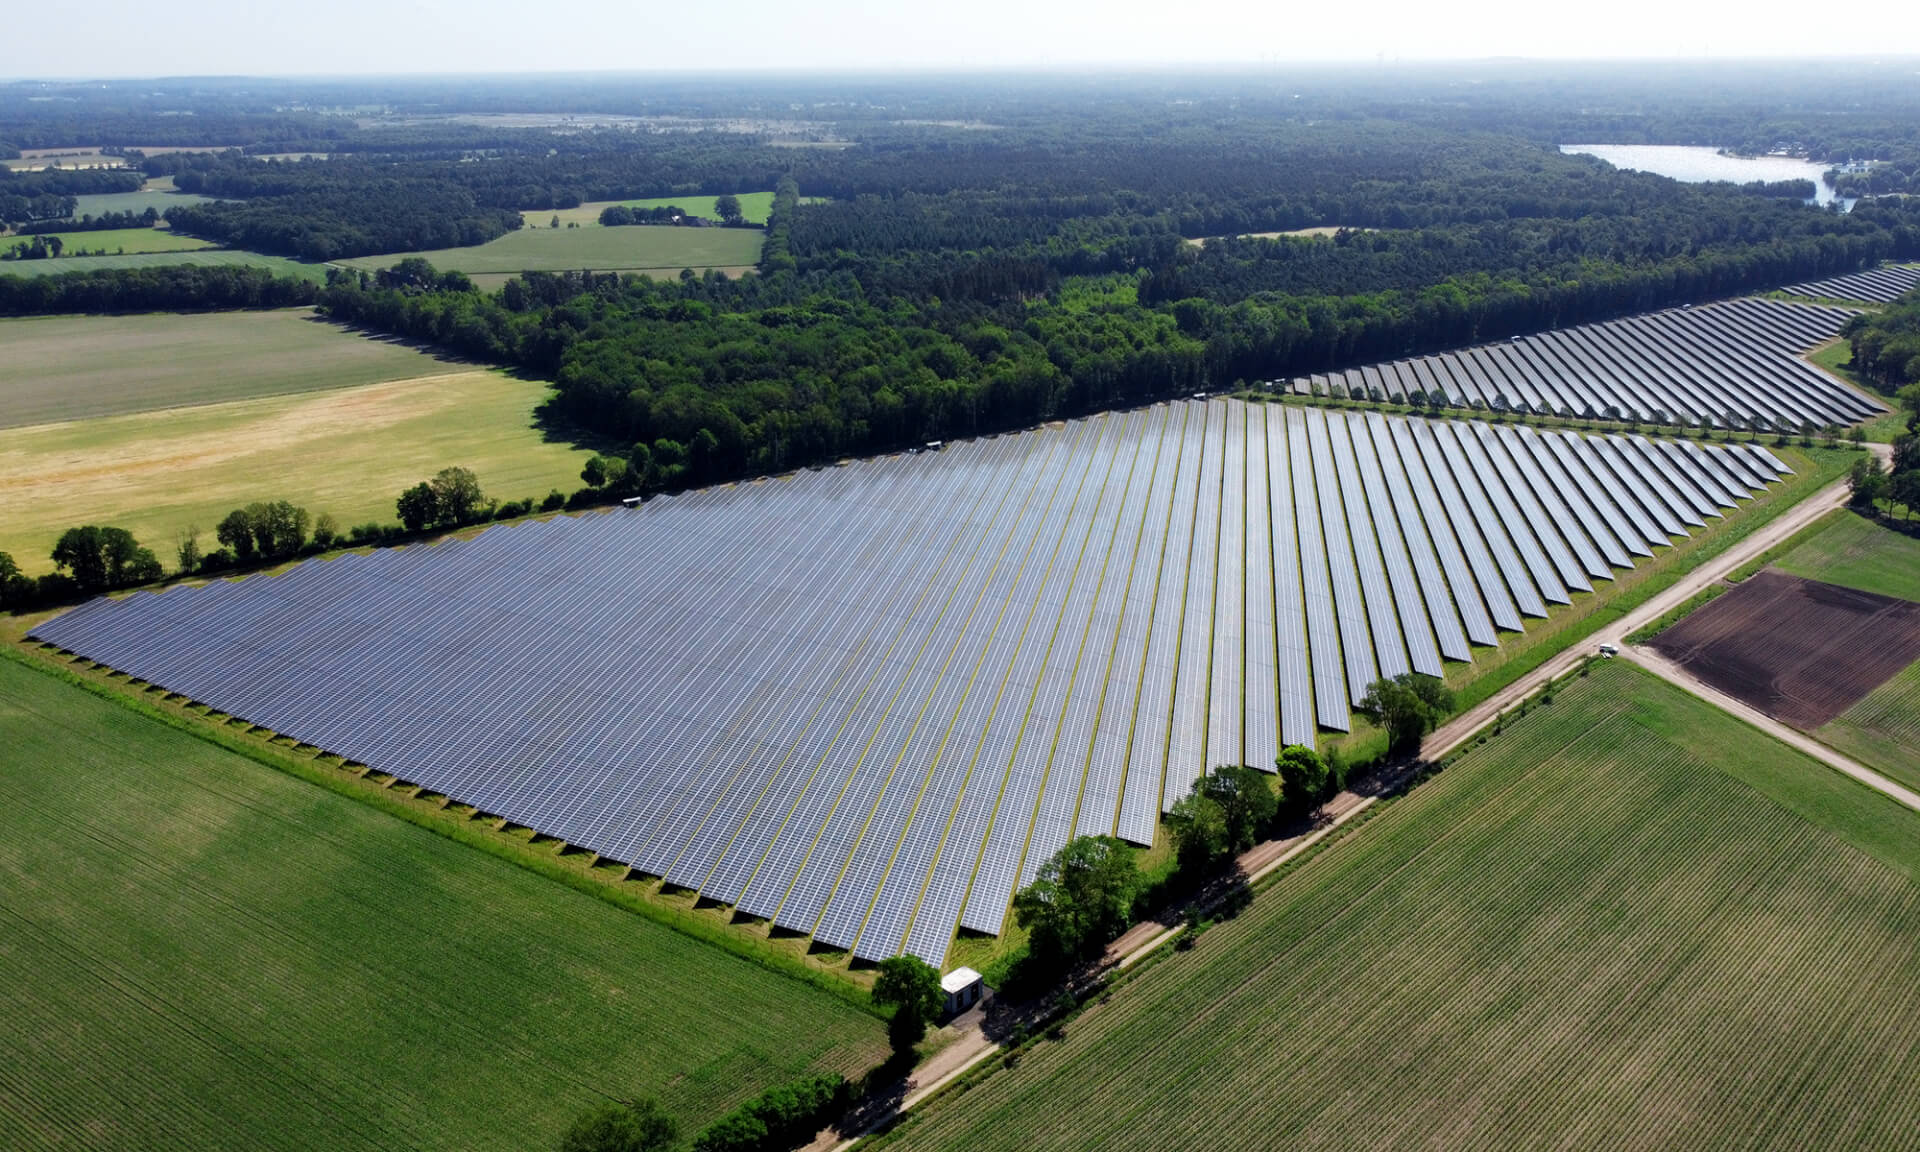 A solar farm in the Netherlands shown from above